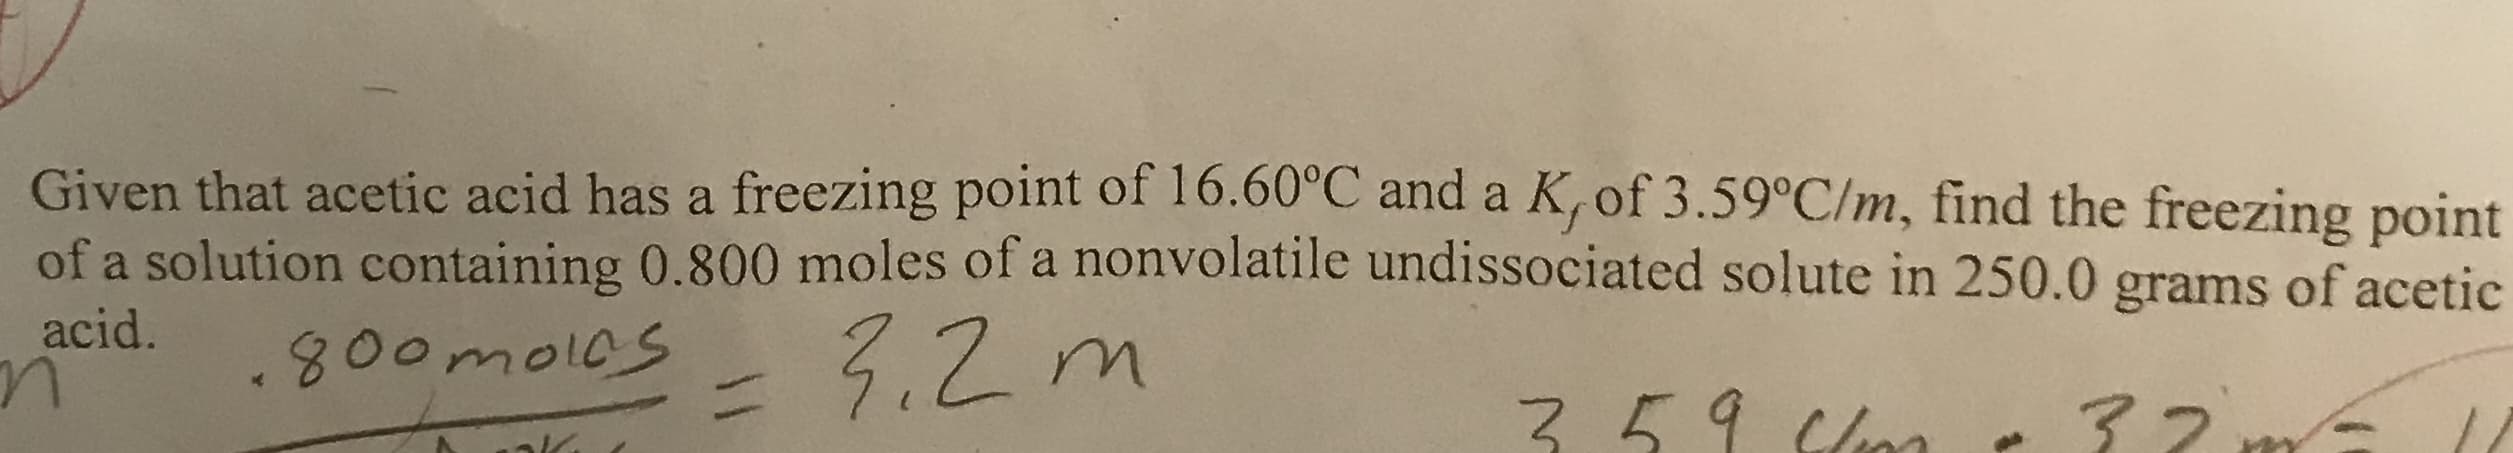 Given that acetic acid has a freezing point of 16.60°C and a K, of 3.59°C/m, find the freezing point
of a solution containing 0.800 moles of a nonvolatile undissociated solute in 250.0 grams of acetic
acid.
3oomoloS
